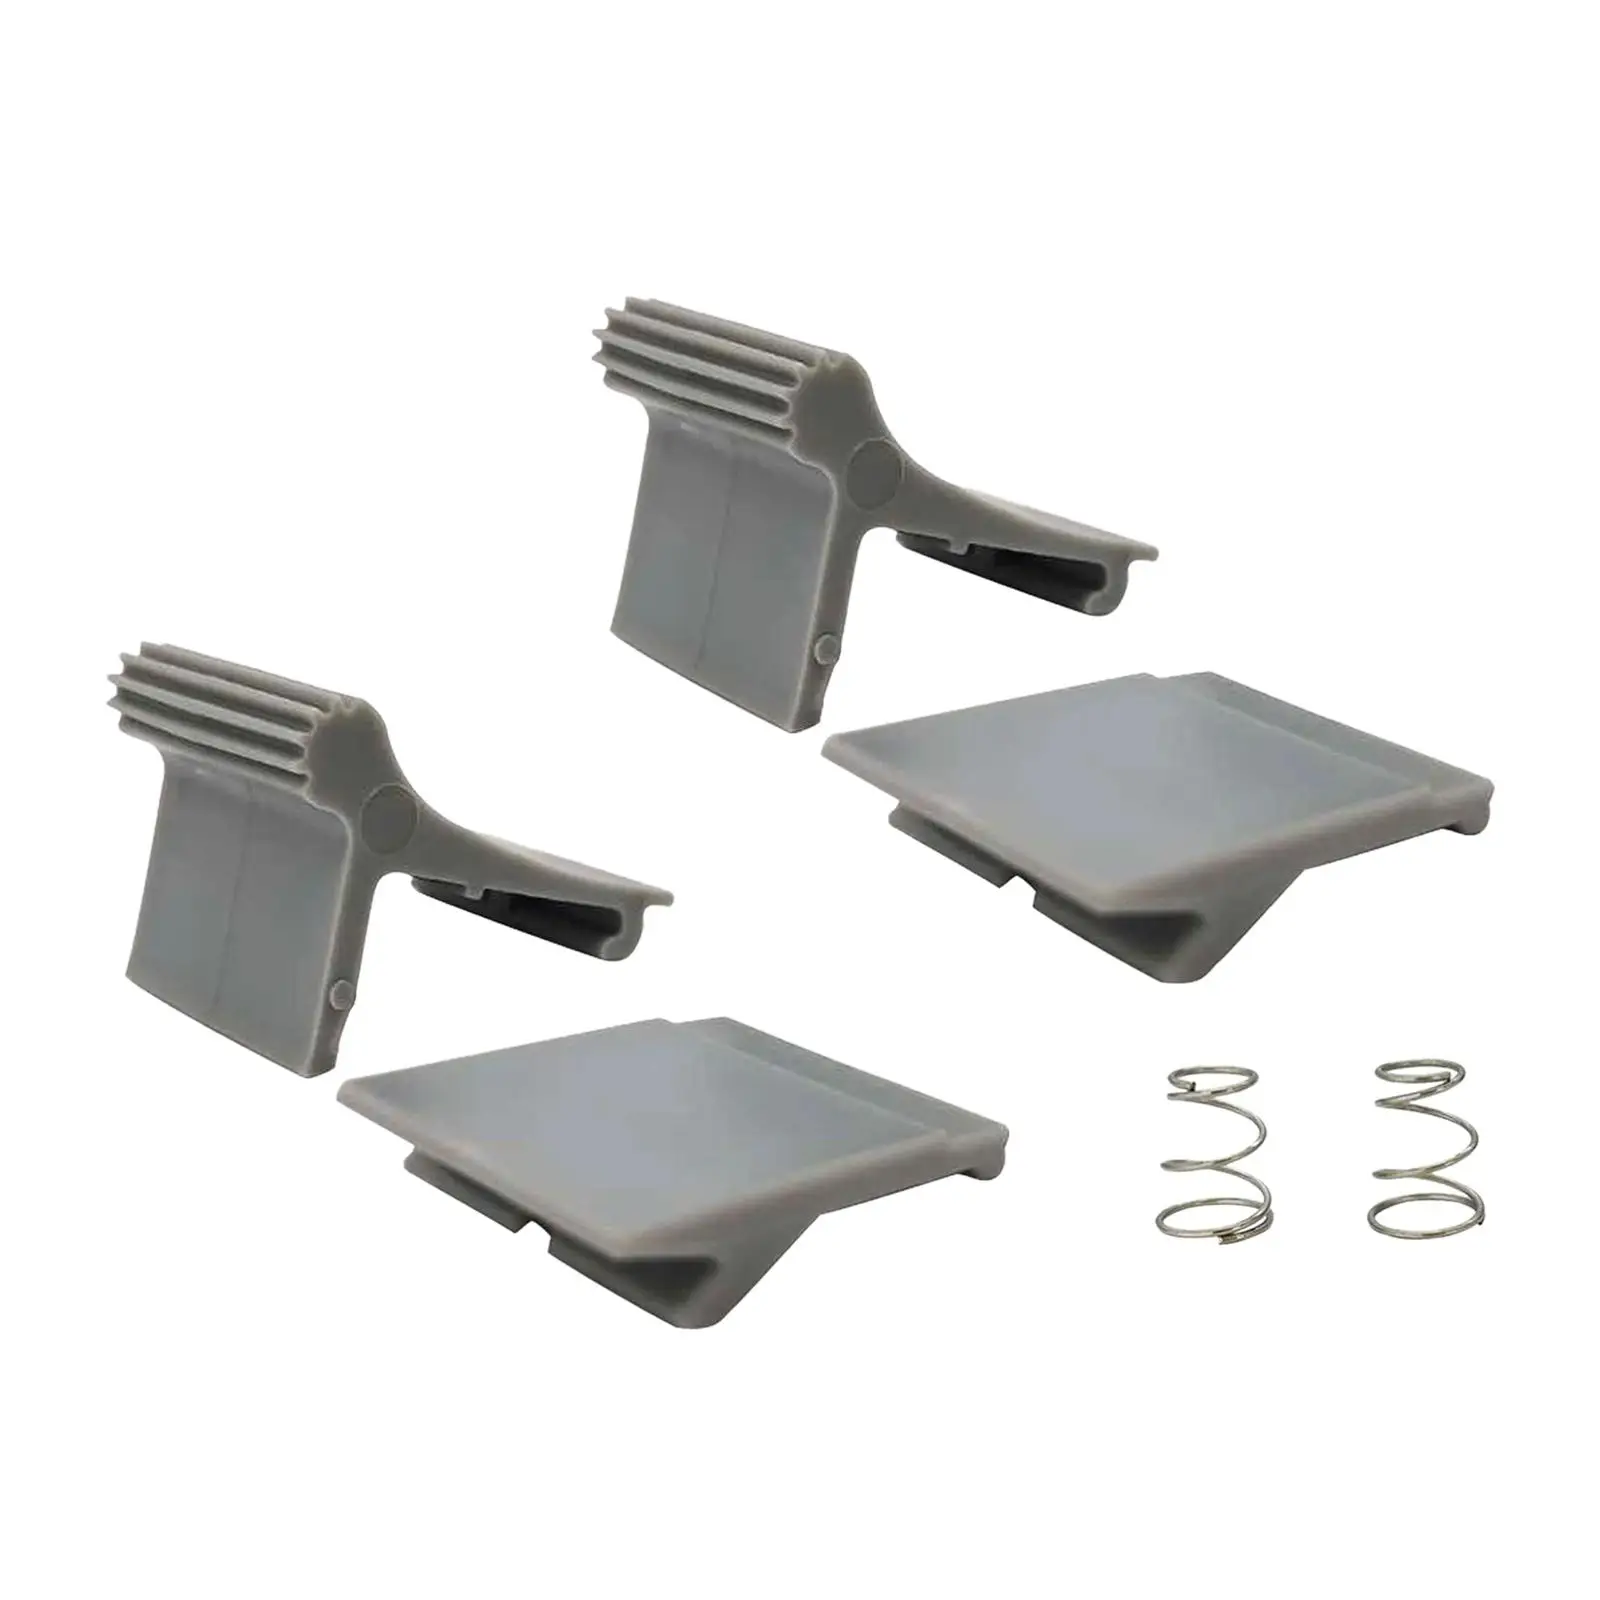 Awning Arm Slider Catch Set with 2 Springs 4 Slider Catch Spare Parts